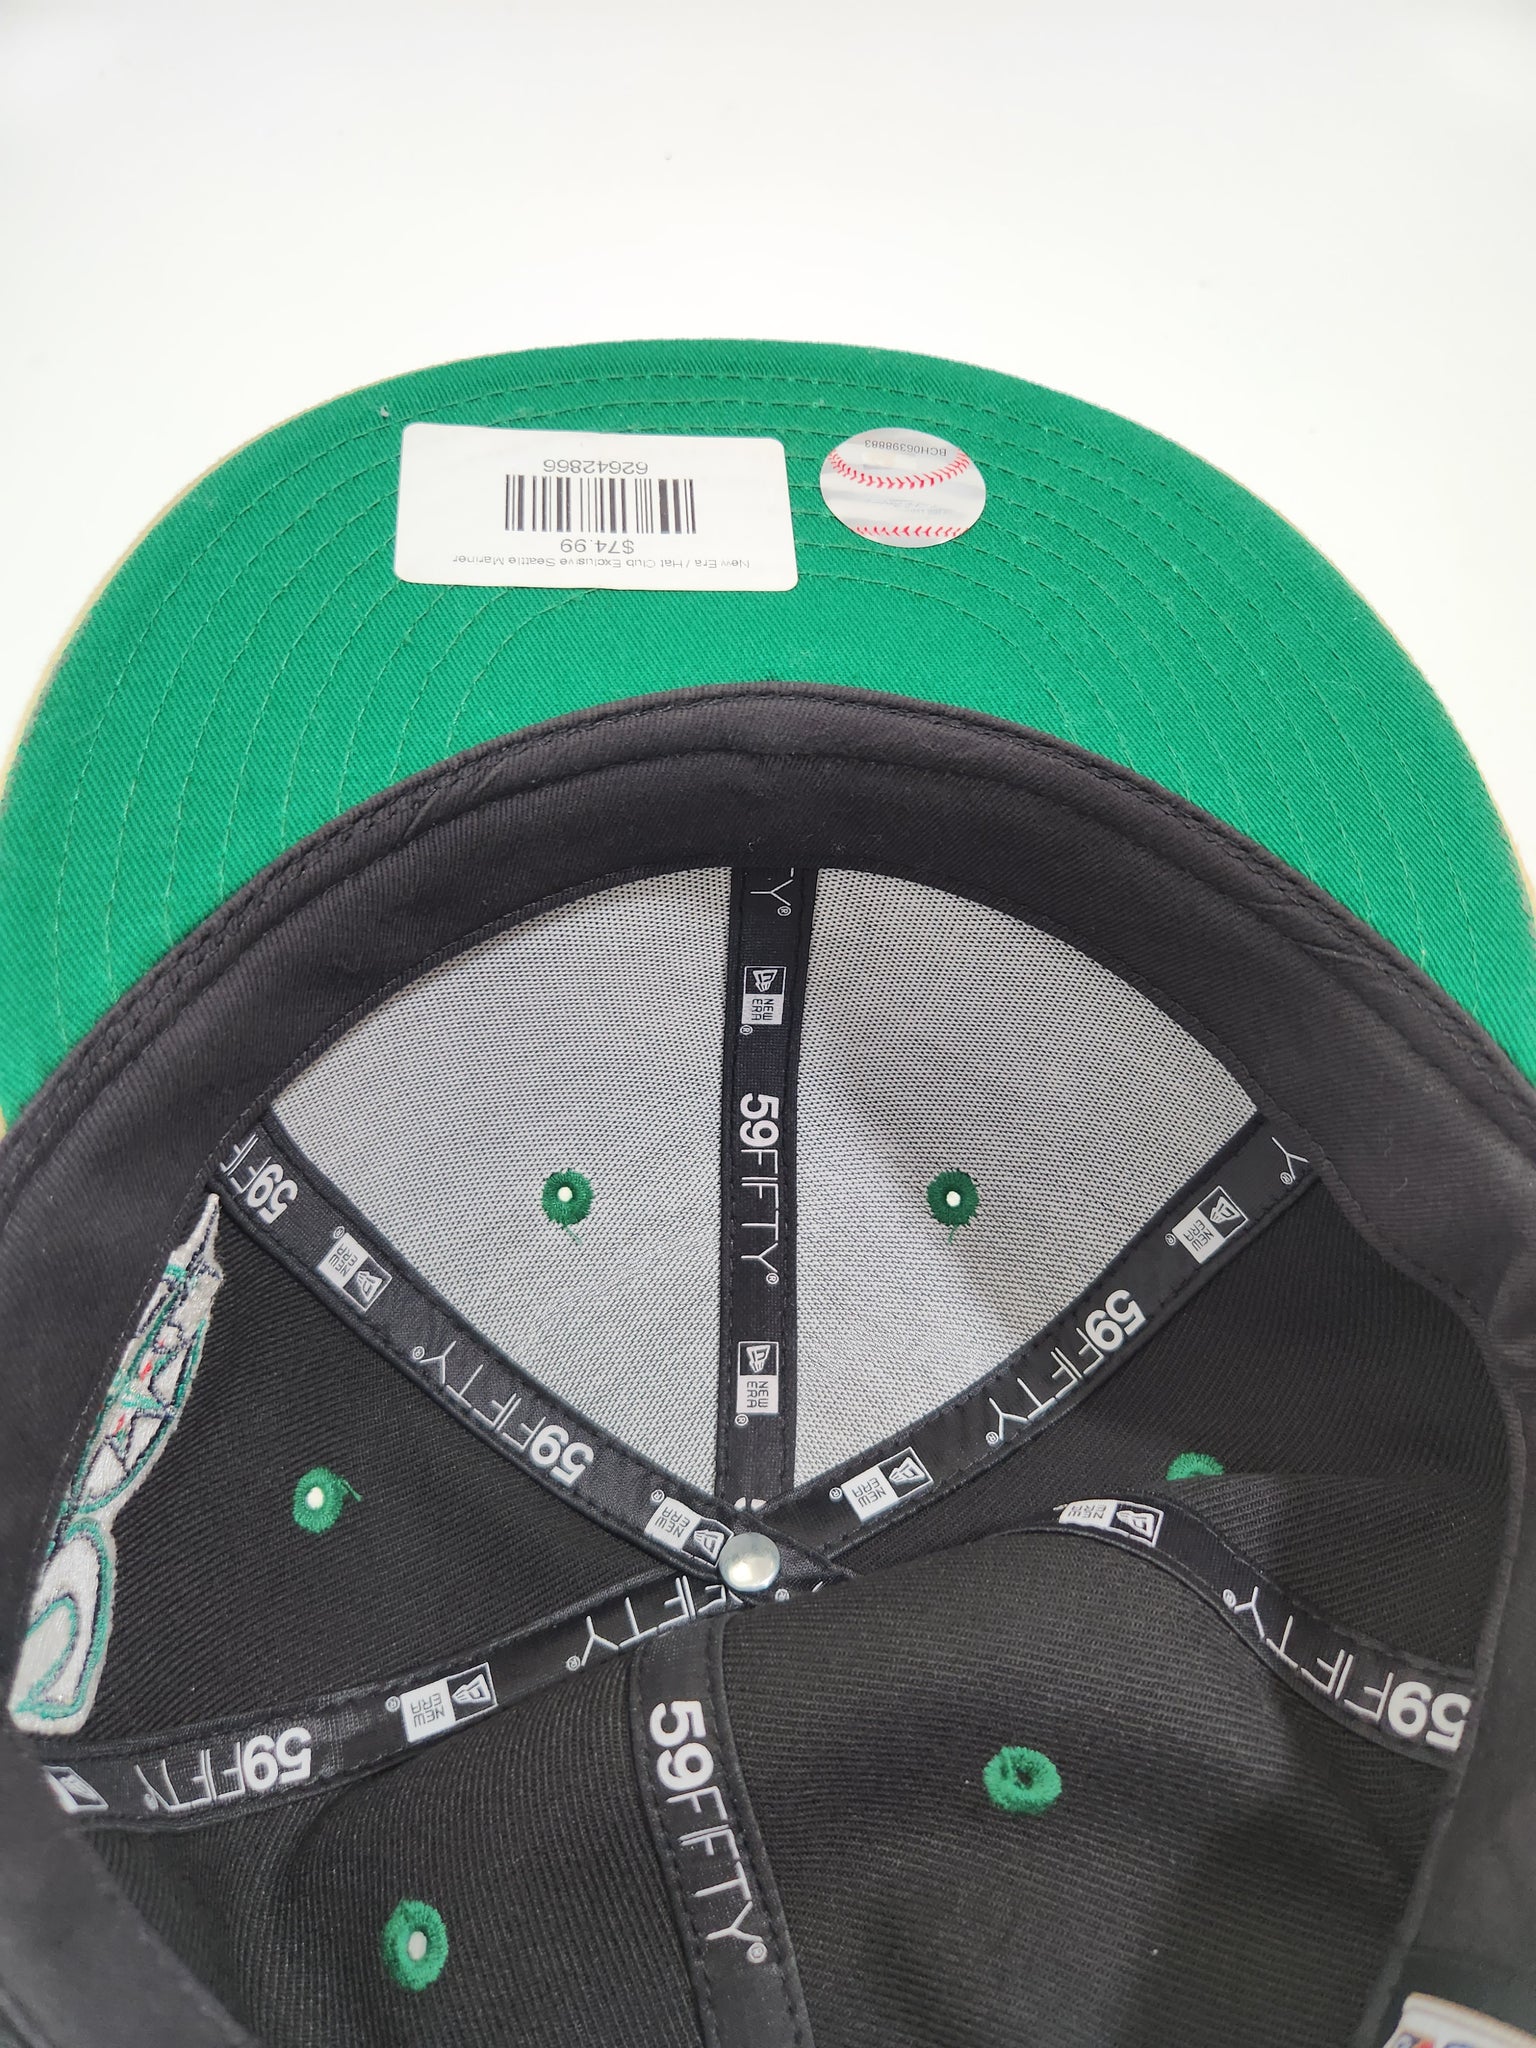 Seattle Mariners 20th Anni. New Era 59FIFTY Grey Hat Teal Bottom